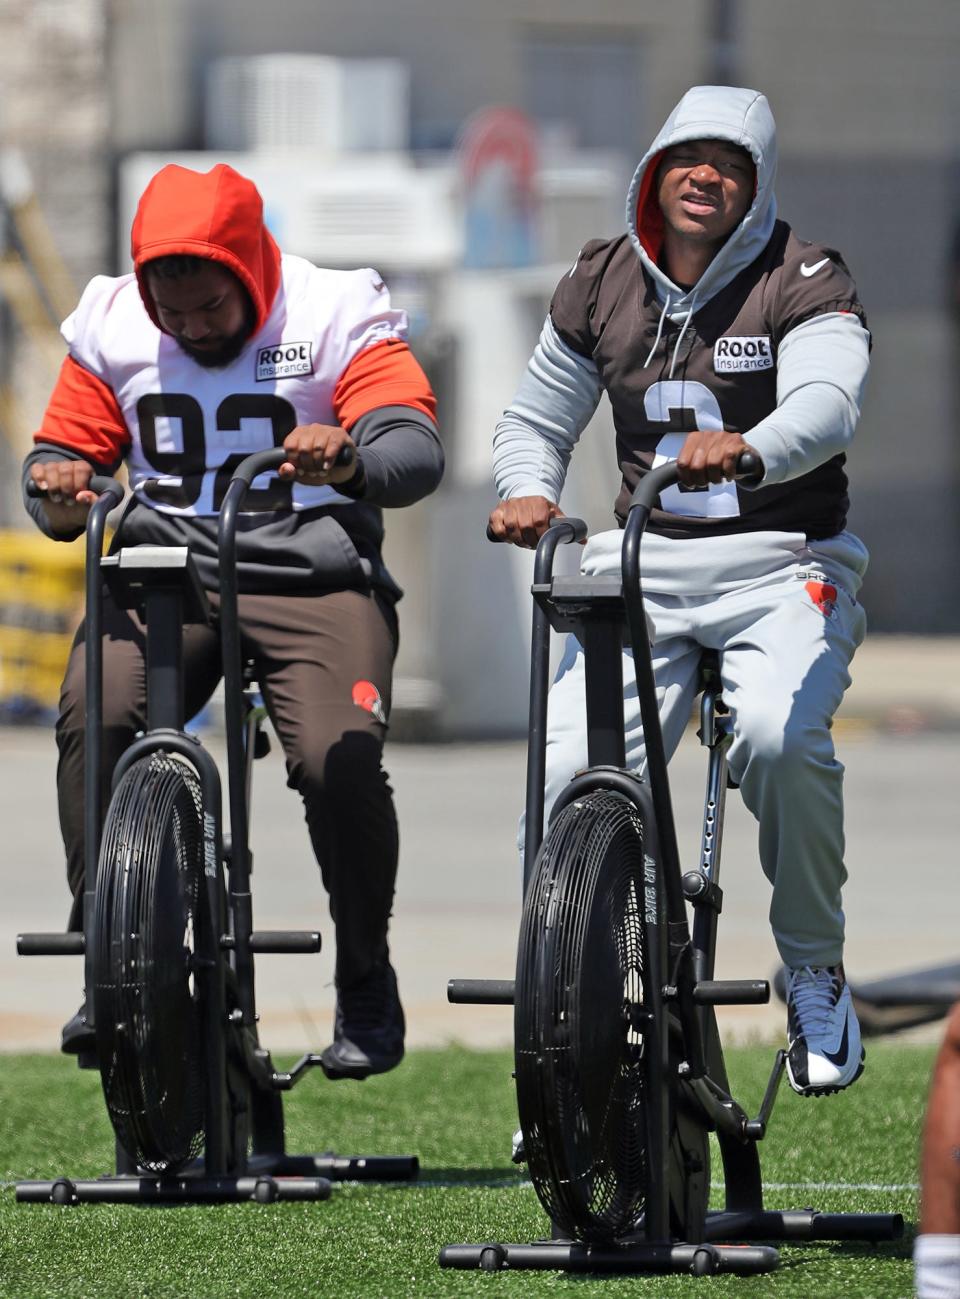 Cleveland Browns wide receiver Amari Cooper, right, rides an exercise bike on the sideline during the NFL football team's football training camp in Berea on Tuesday.